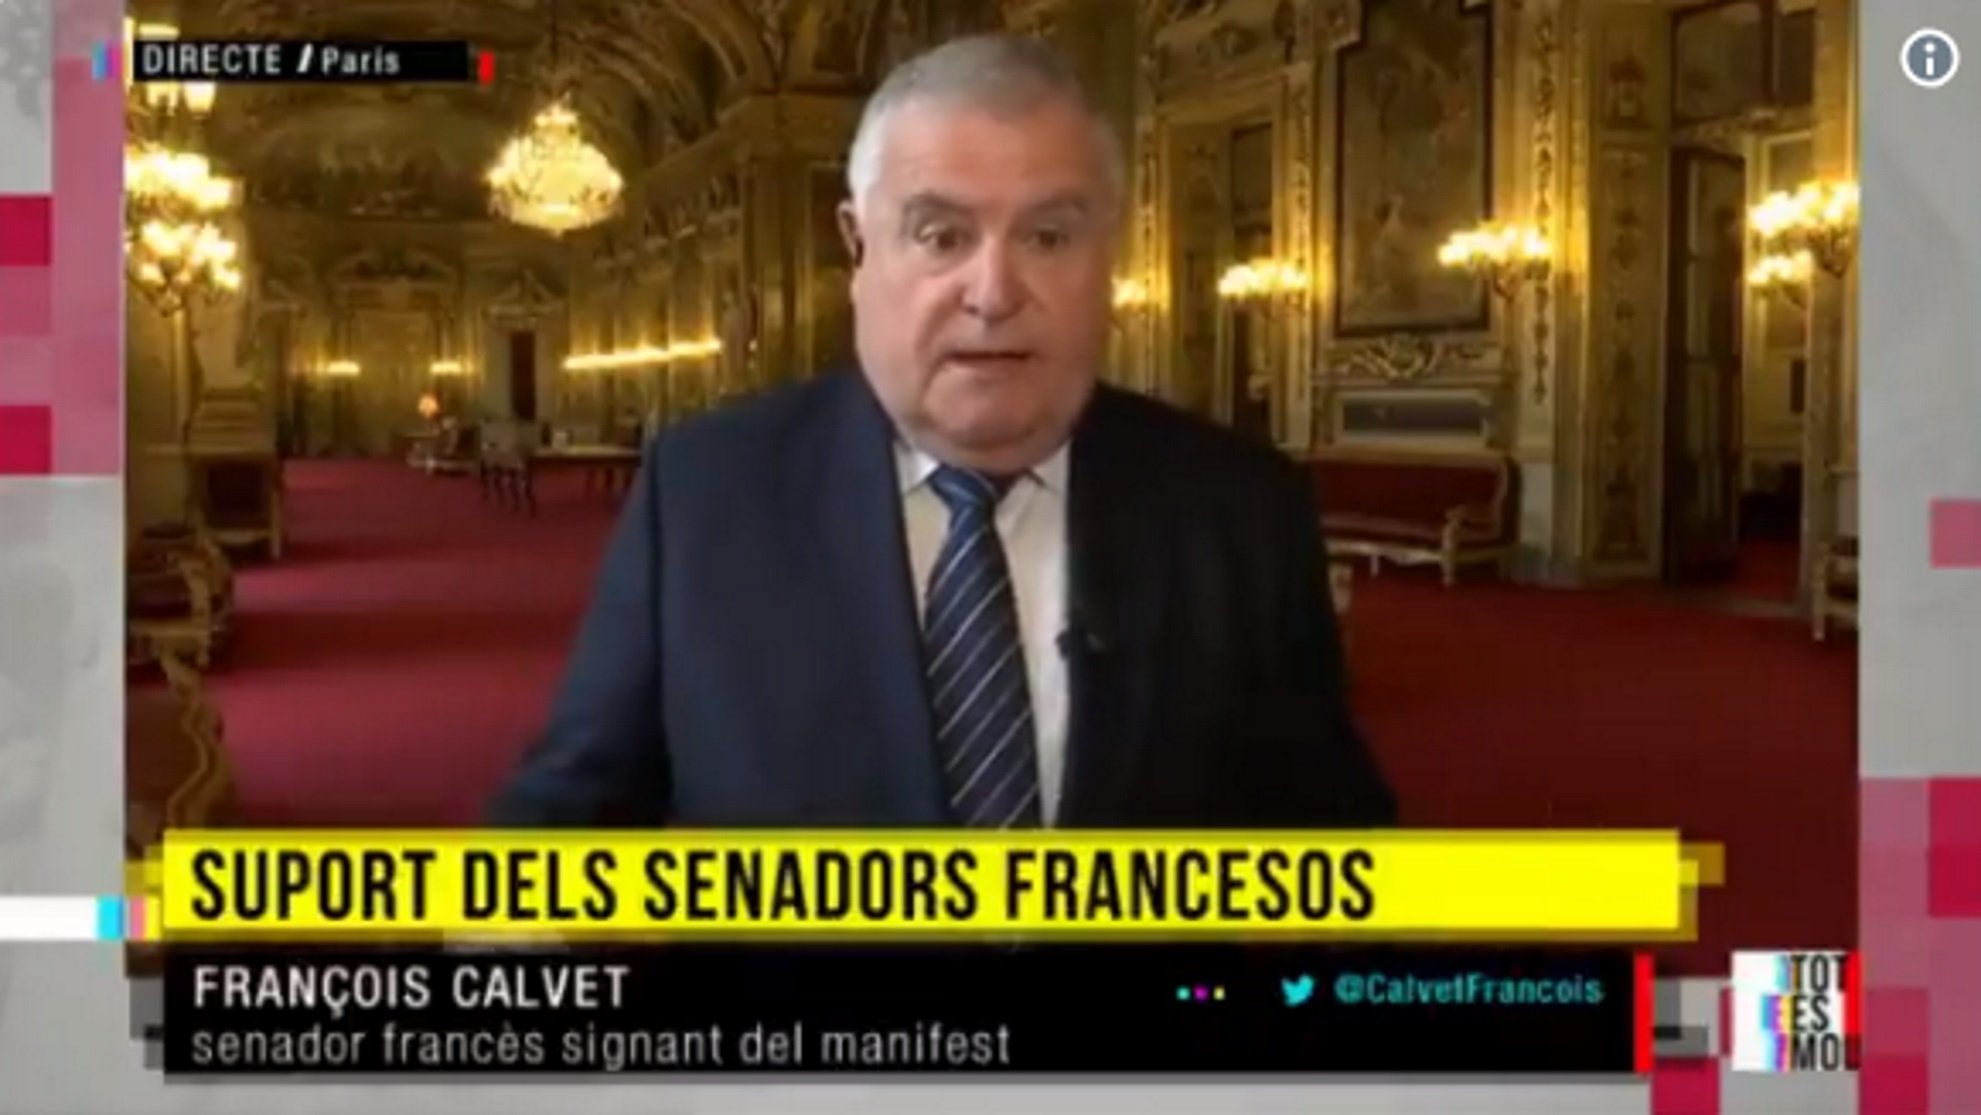 French senator: "Spain isn't a democracy as far as justice is concerned"